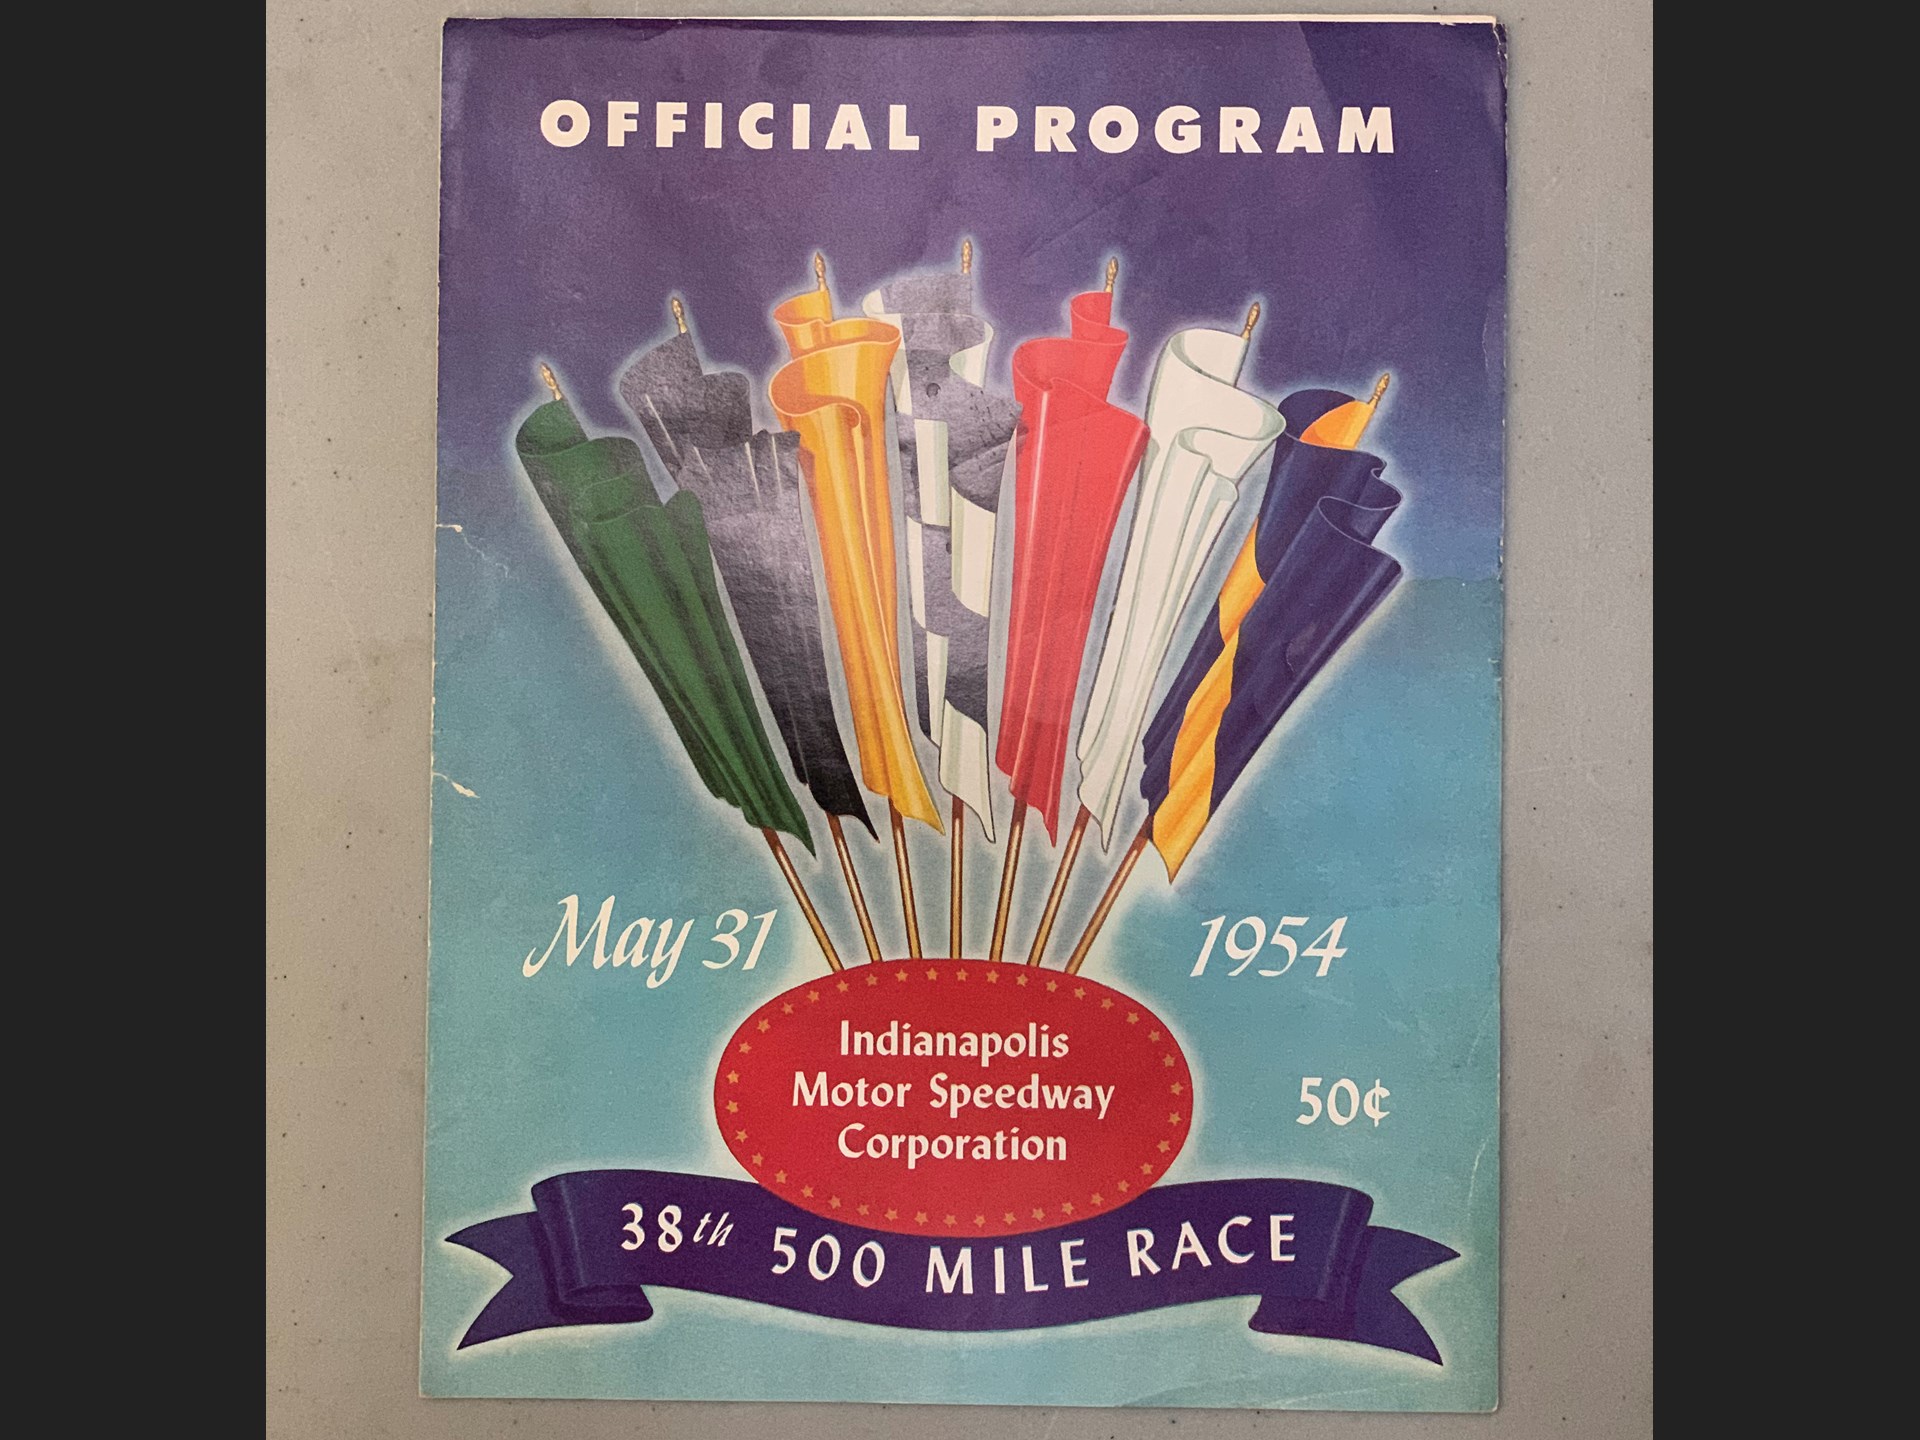 1954 Indy 500 Awards Banquet Program with Signatures Auburn Fall 2019